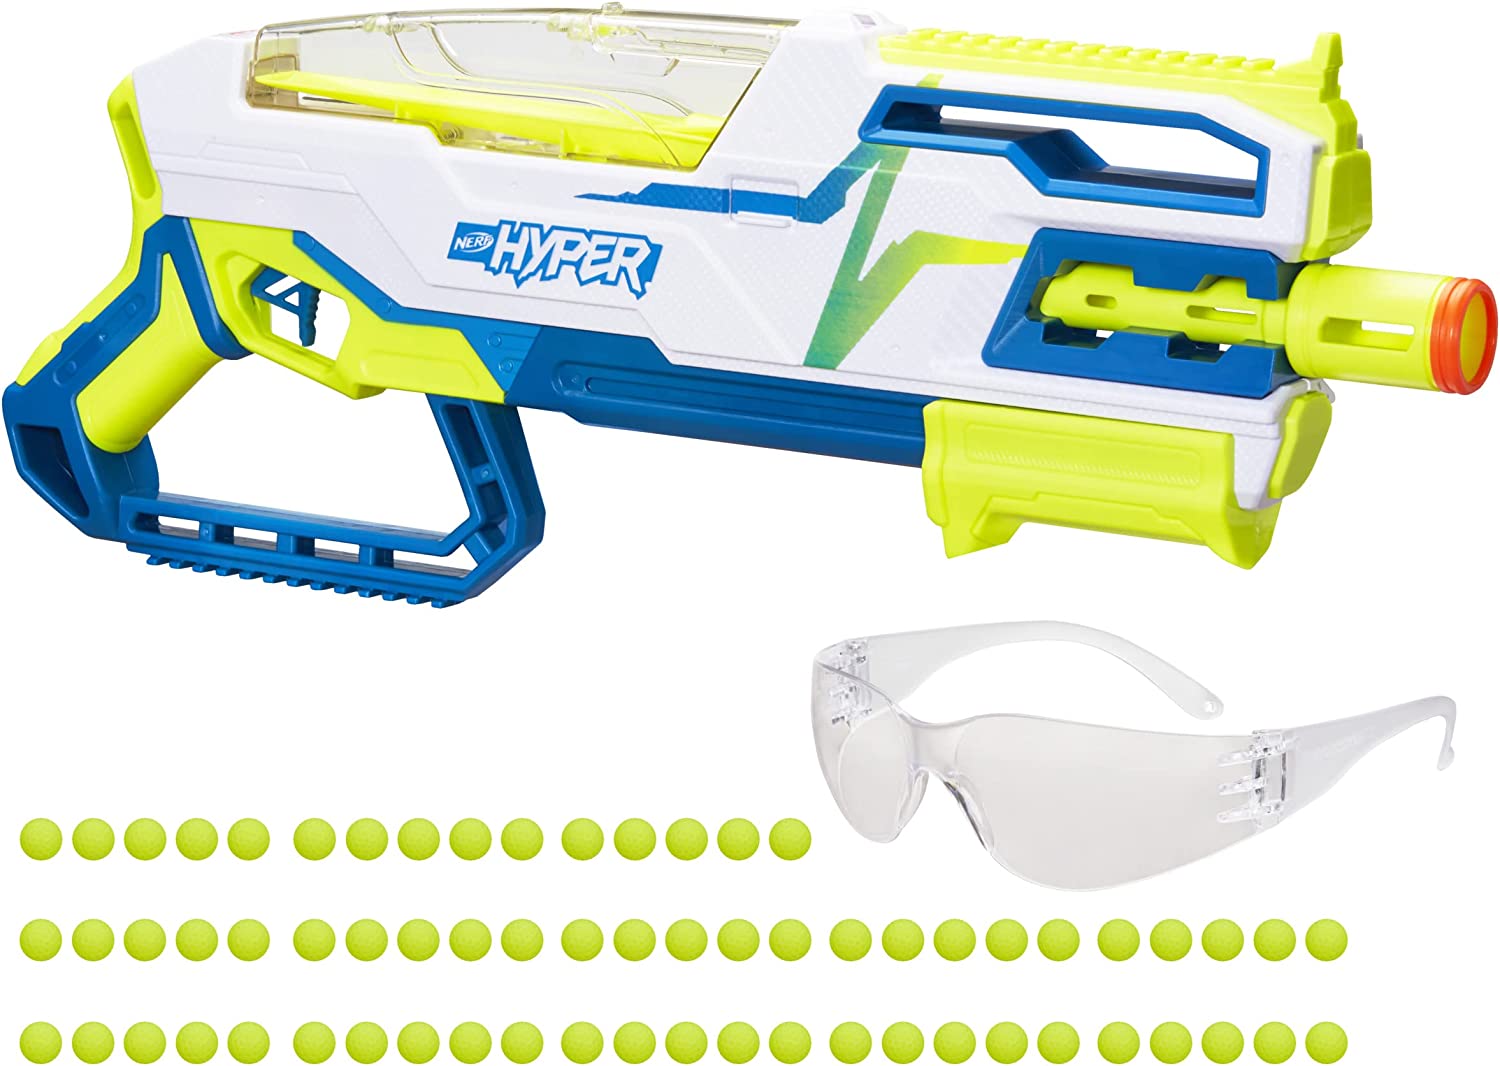 Nerf Hyper Siege with 65 rounds and safety glasses - $22.99